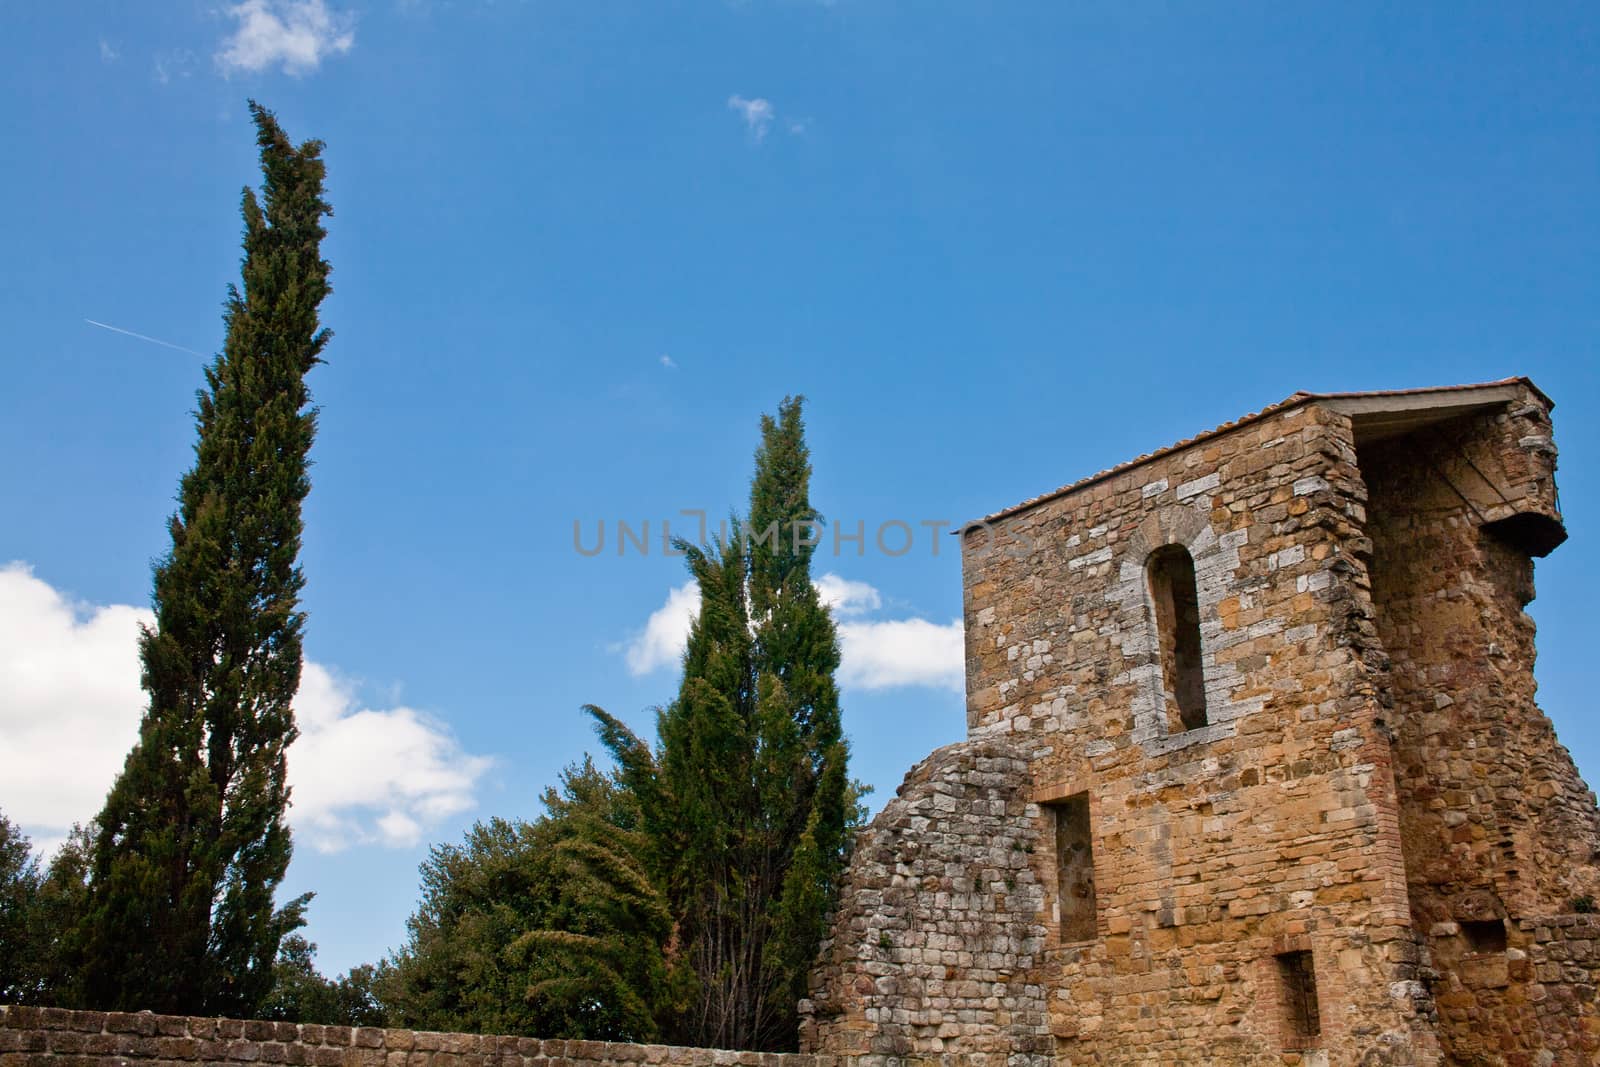 An old medieval building and ruins in San Quirico d'Orcia
